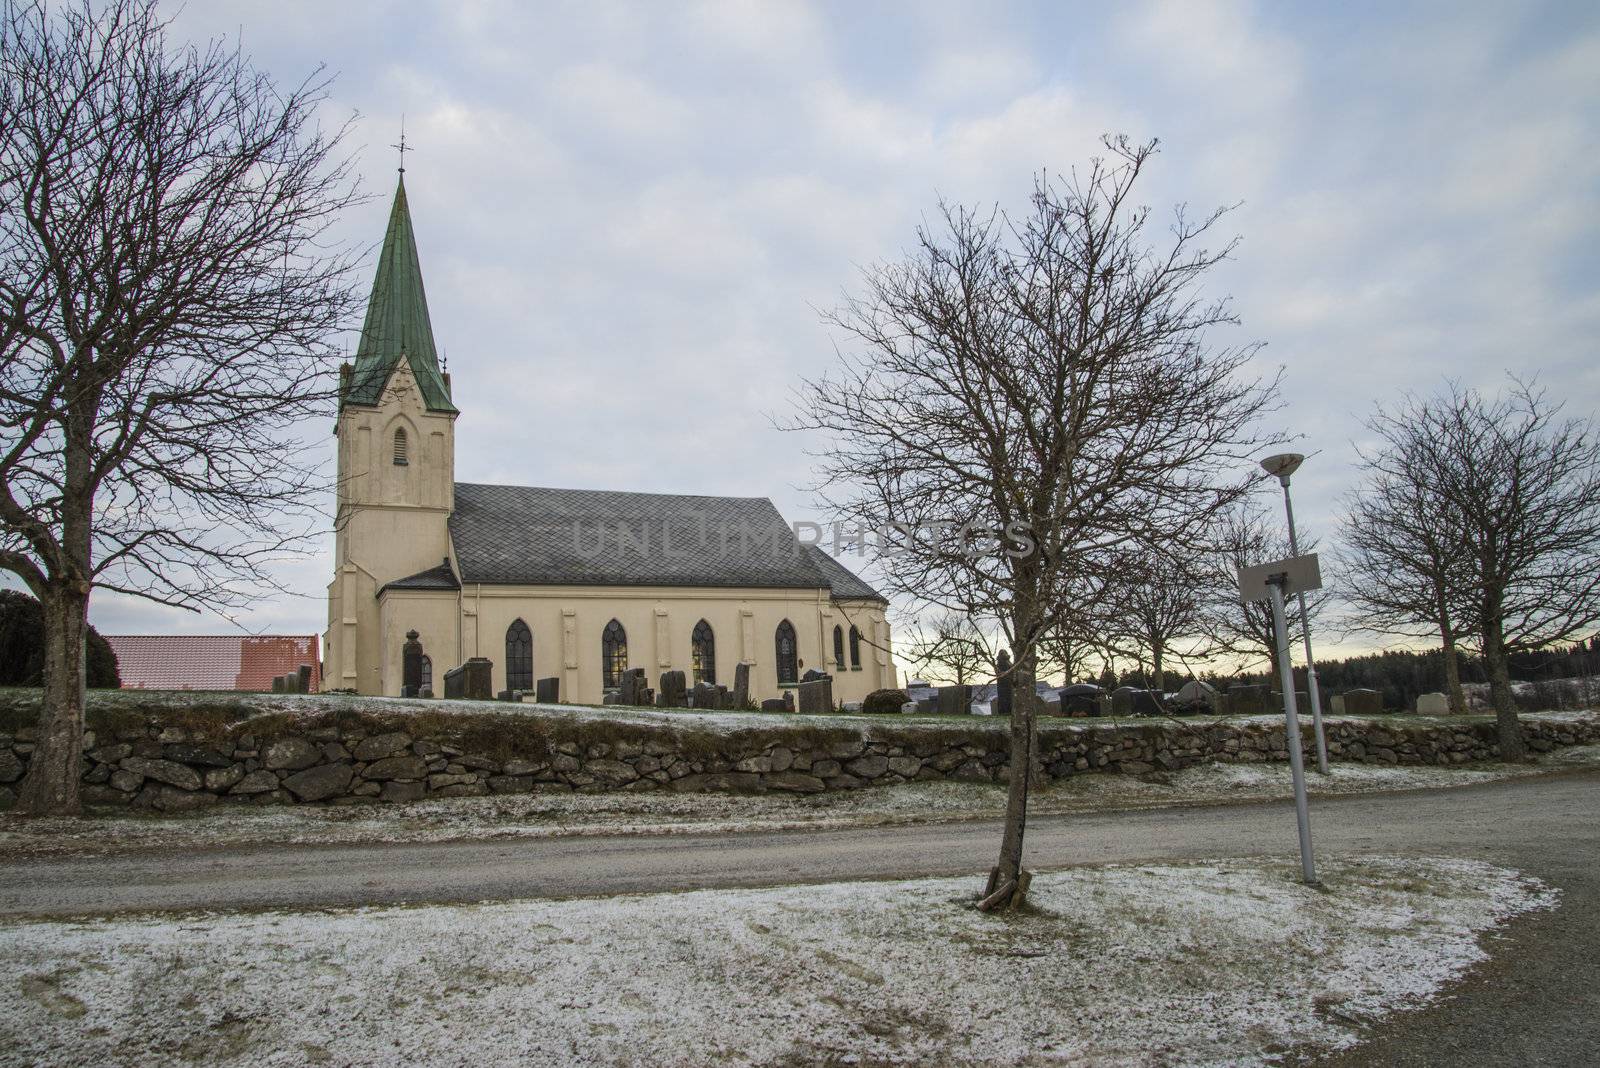 asak is a village and typical agricultural area in the municipality of halden and here are located asak church which is a long church from 1893. the building is in brick and has 400 seats and is in new gothic style. there are graveyard at the church, the picture is shot in december 2012